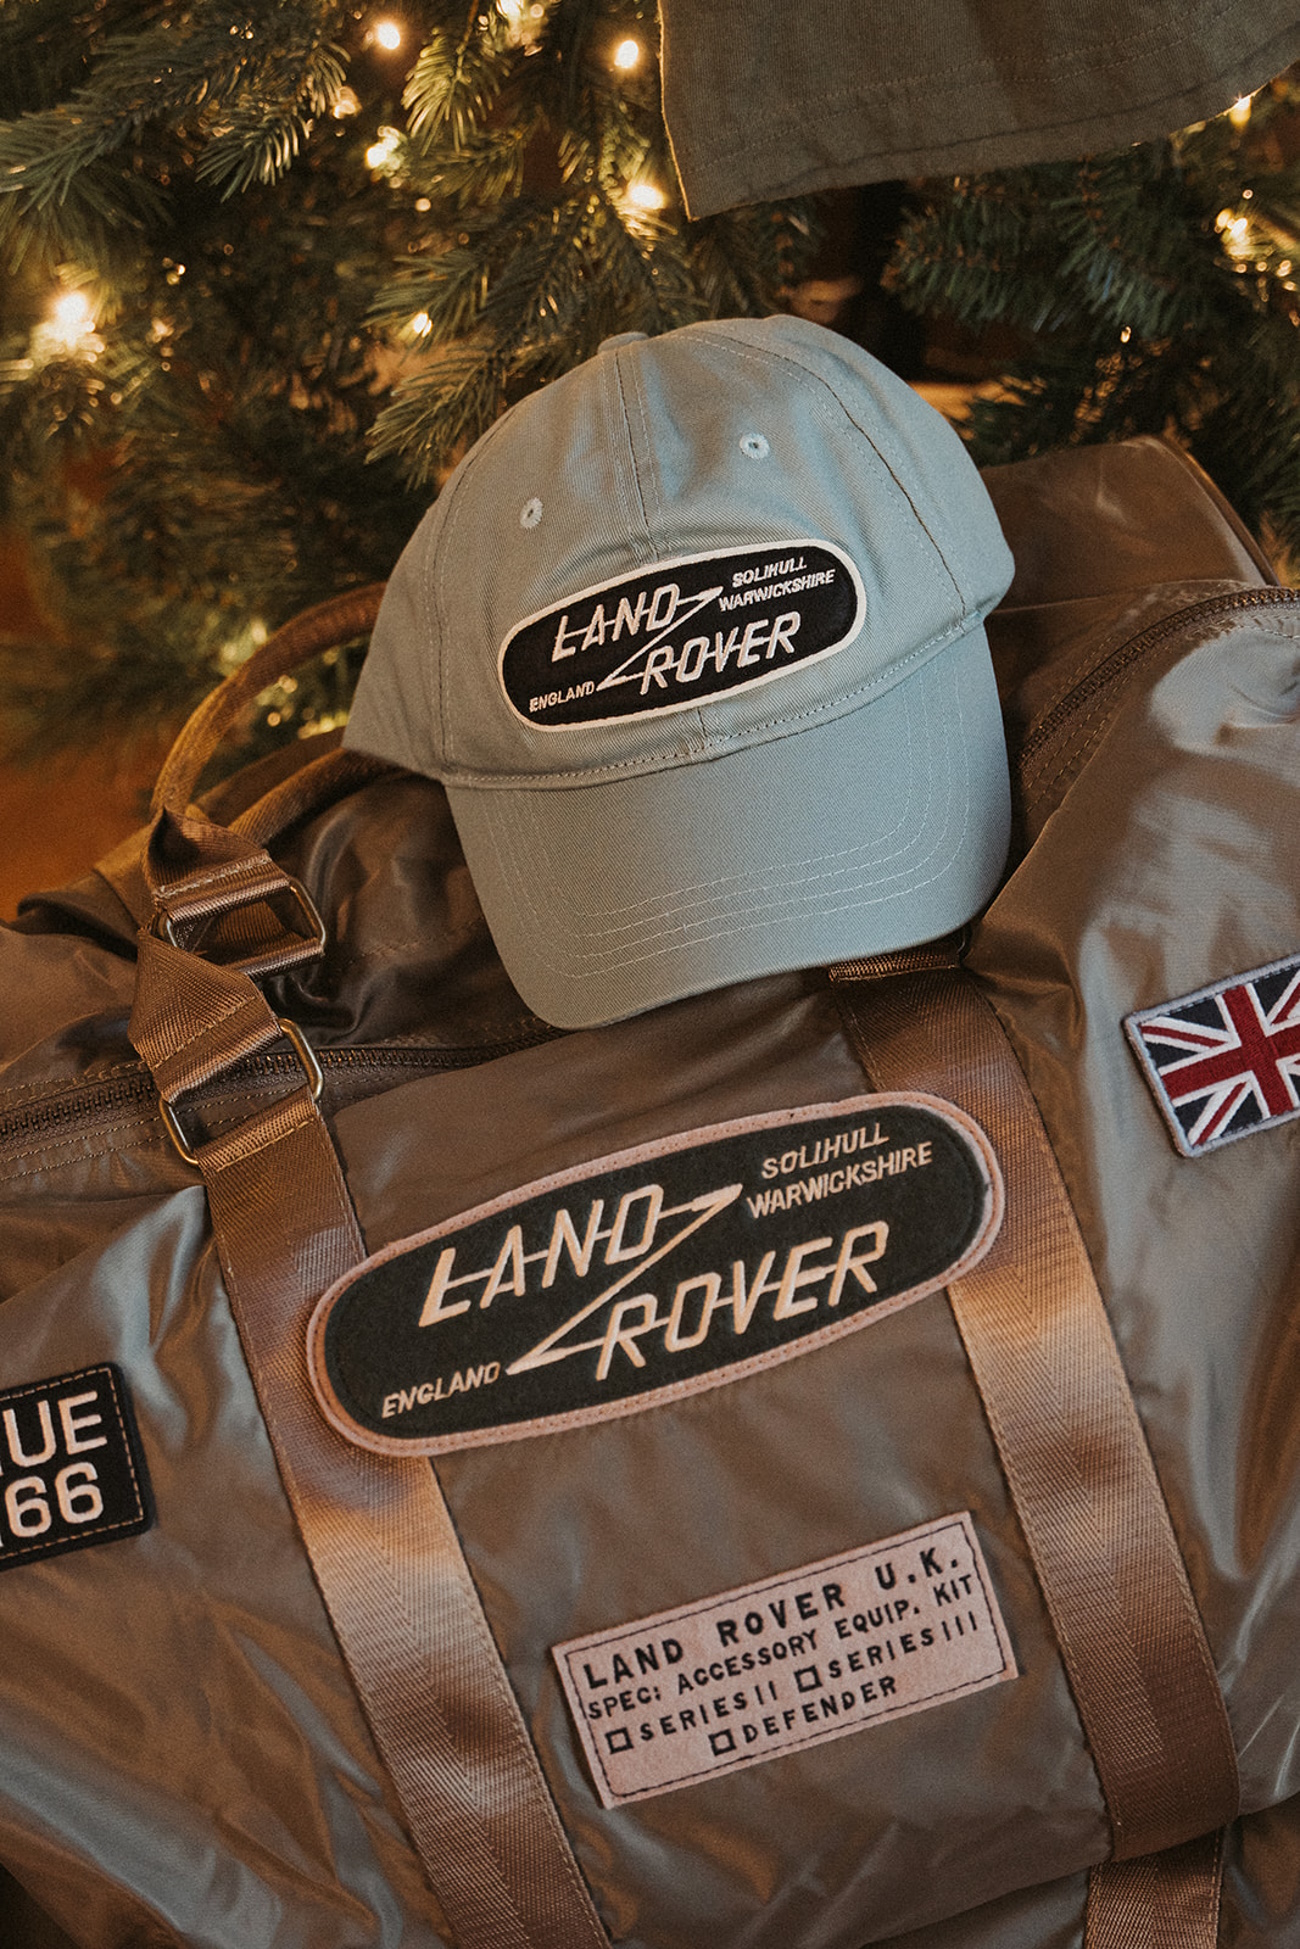 The Gentleman Racer's Annual Holiday Gift Guide